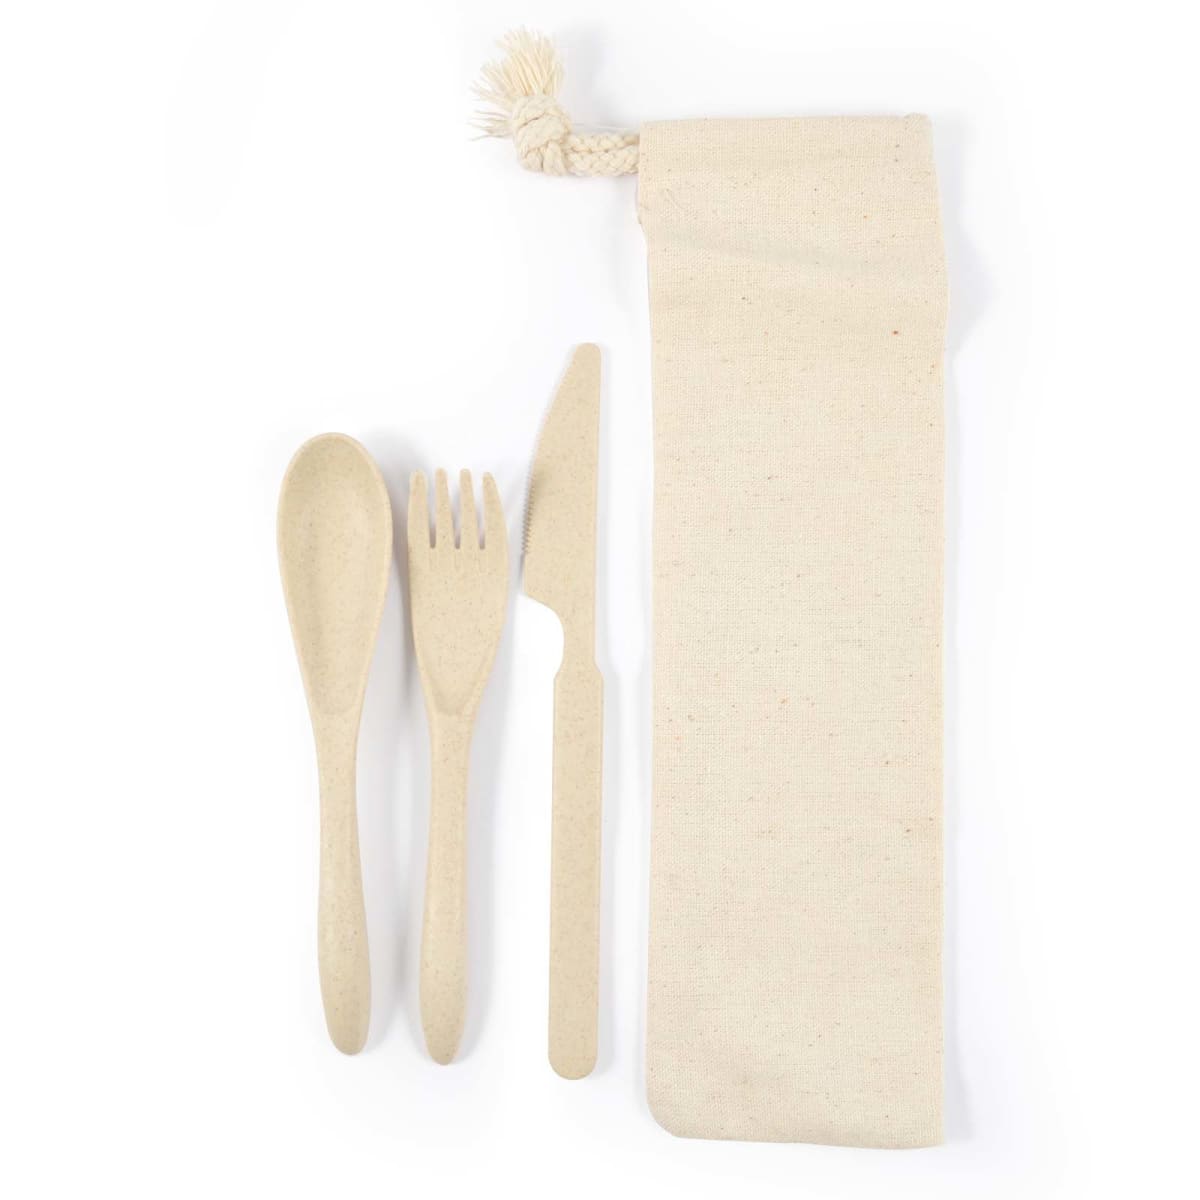 Delish Eco Cutlery Set in Calico Pouch